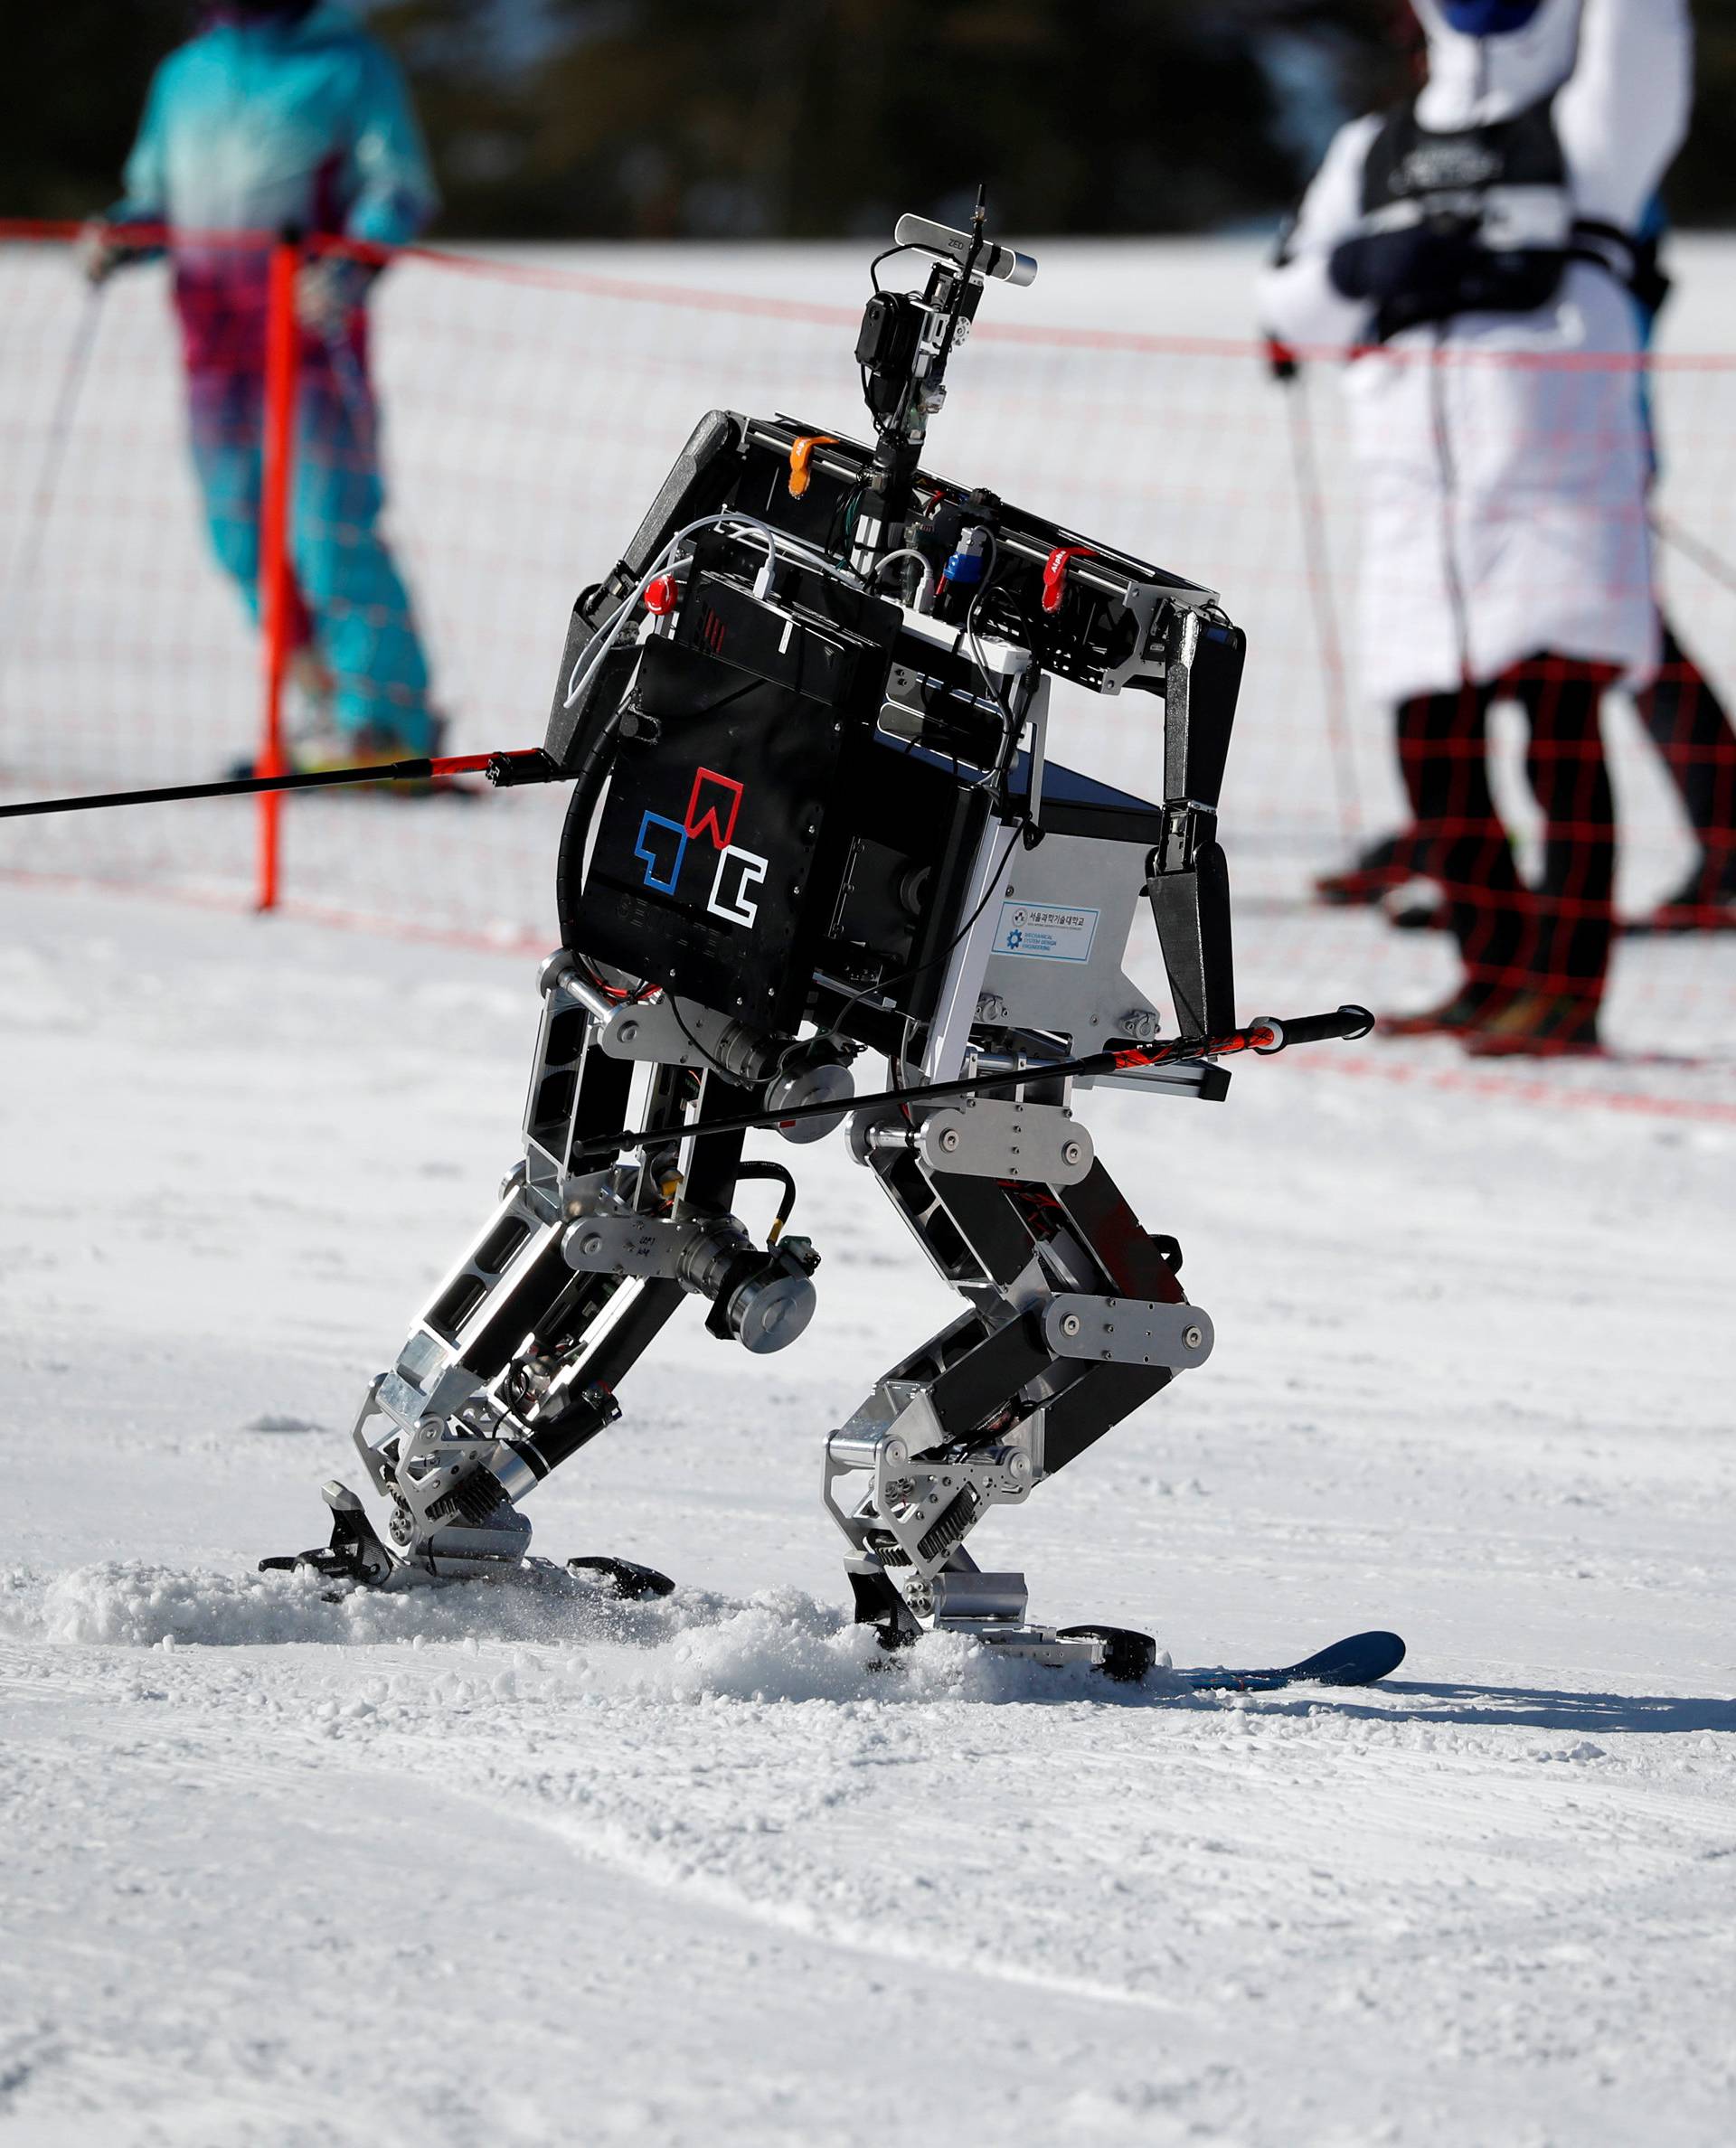 Robot Rudolph skies during the Ski Robot Challenge at a ski resort in Hoenseong